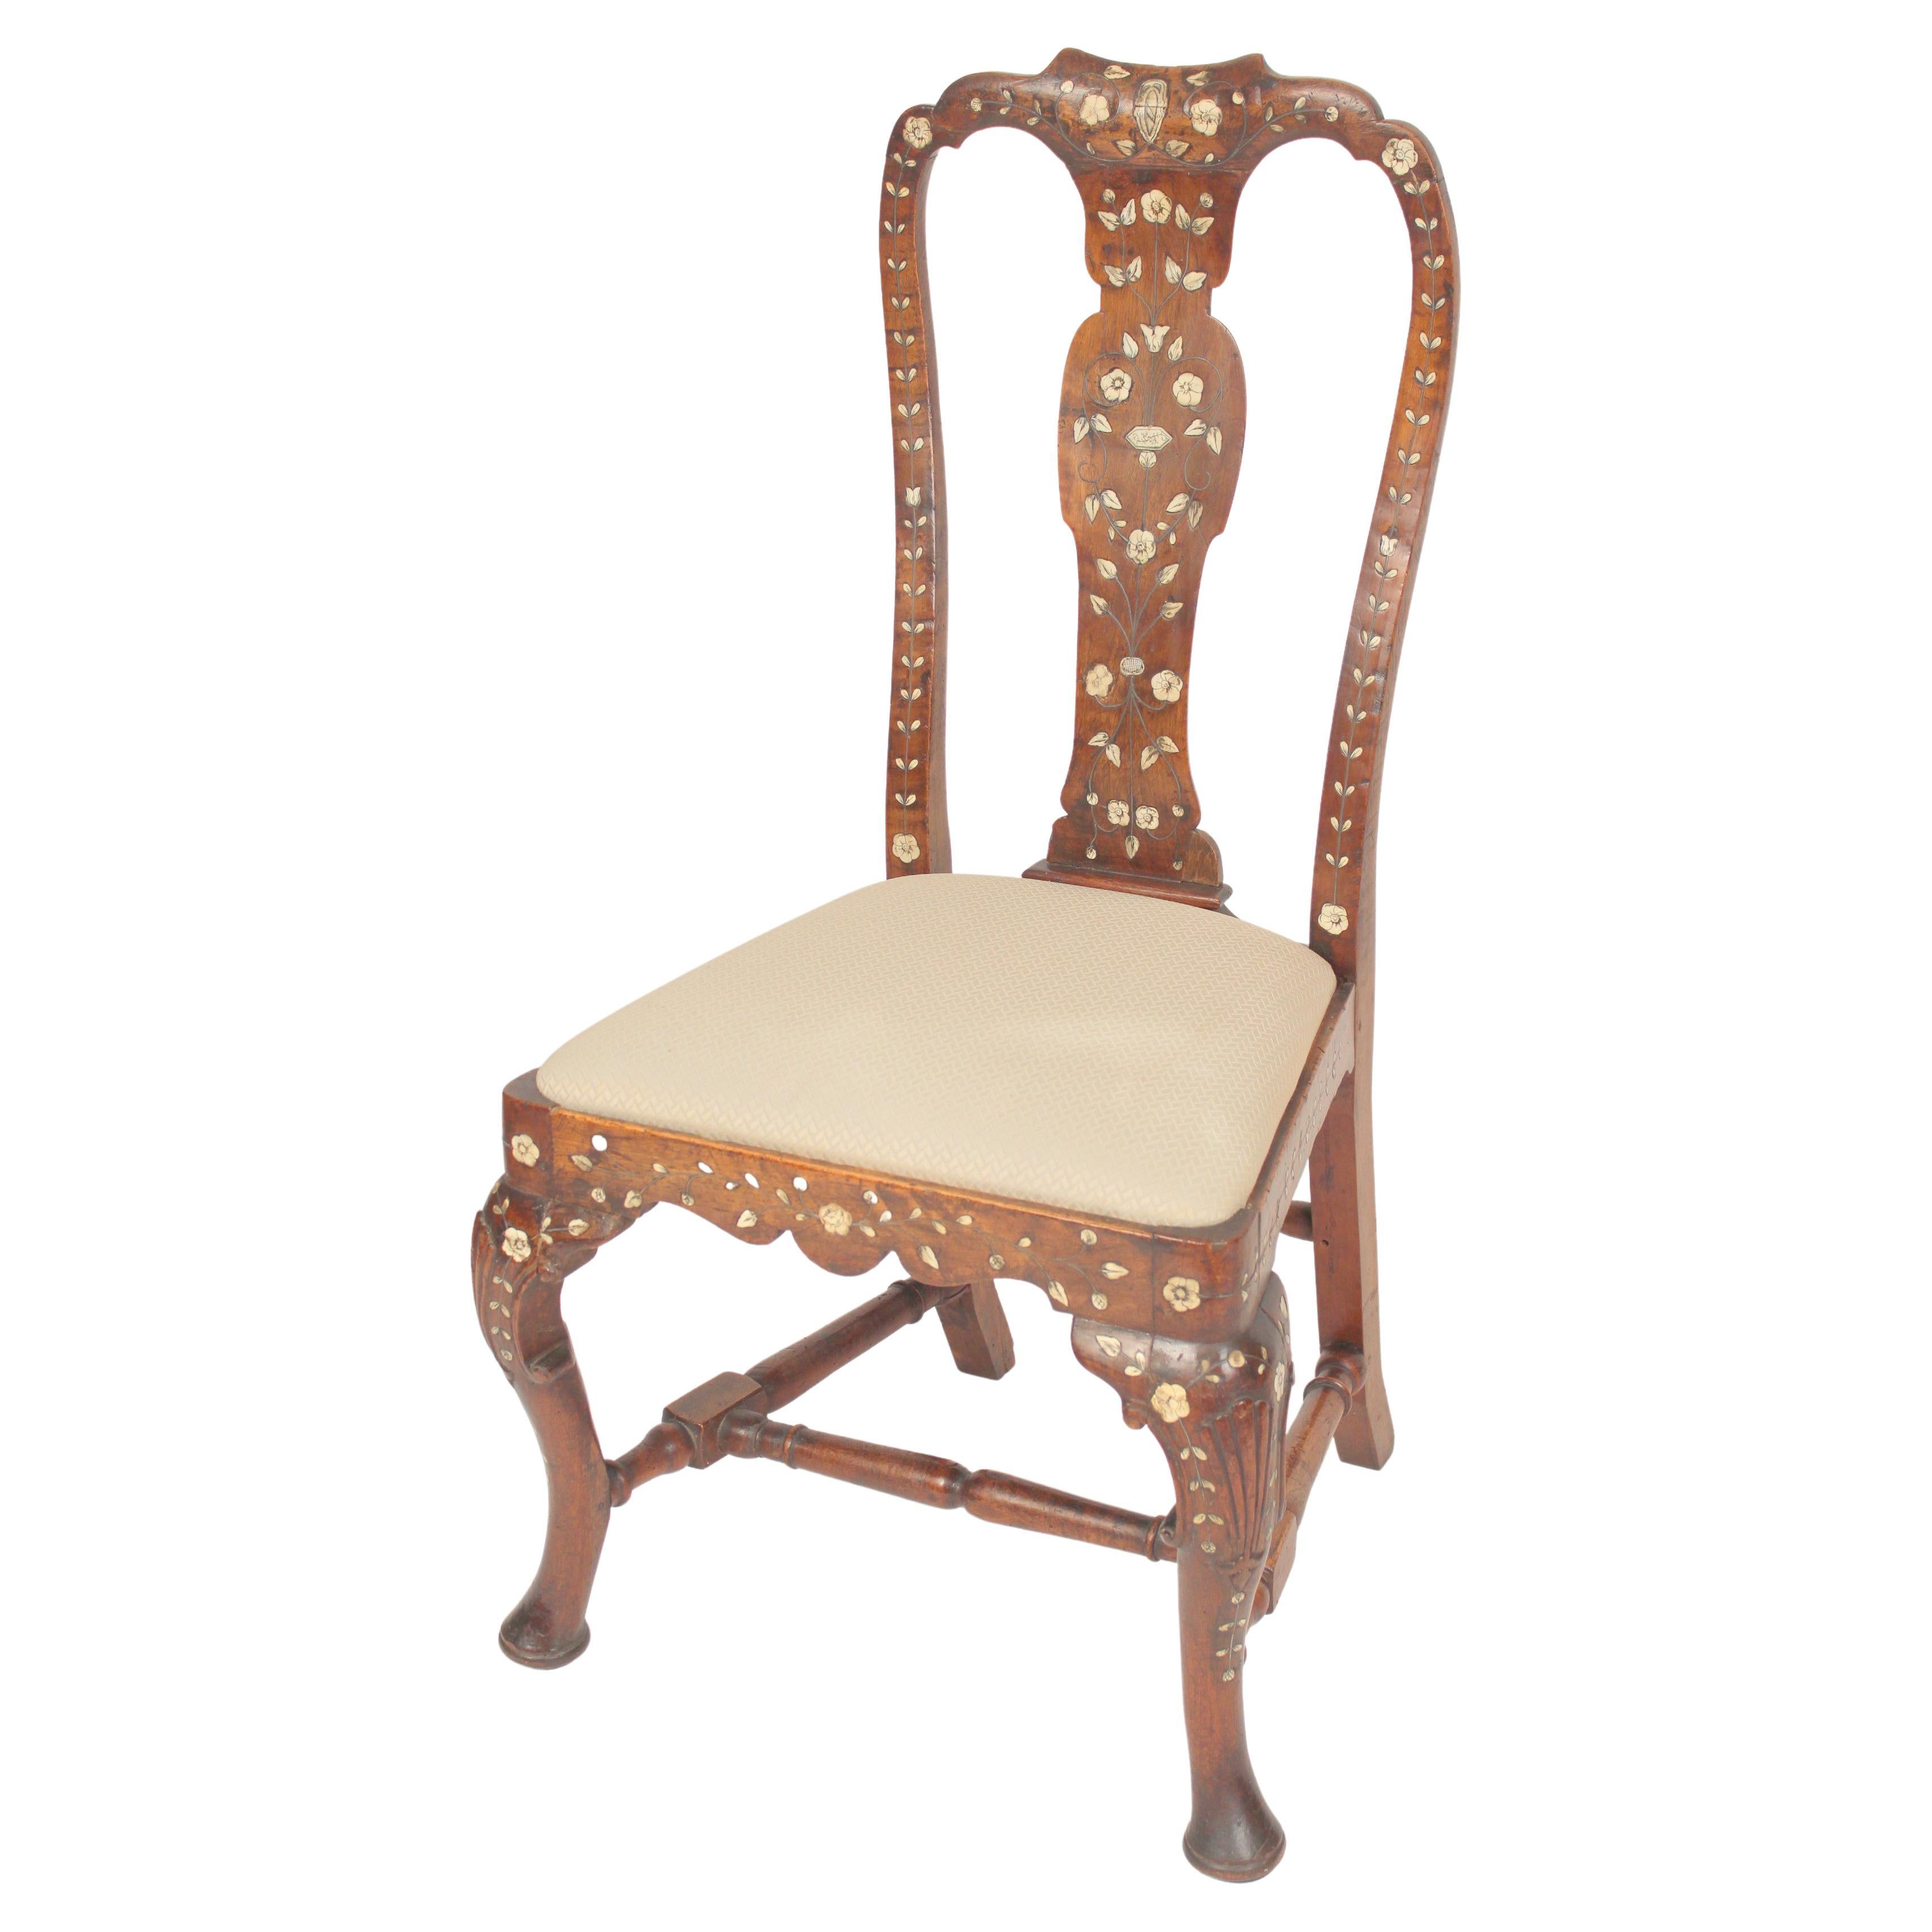 Antique Indian Export Bone Inlaid Queen Anne Style Side Chair